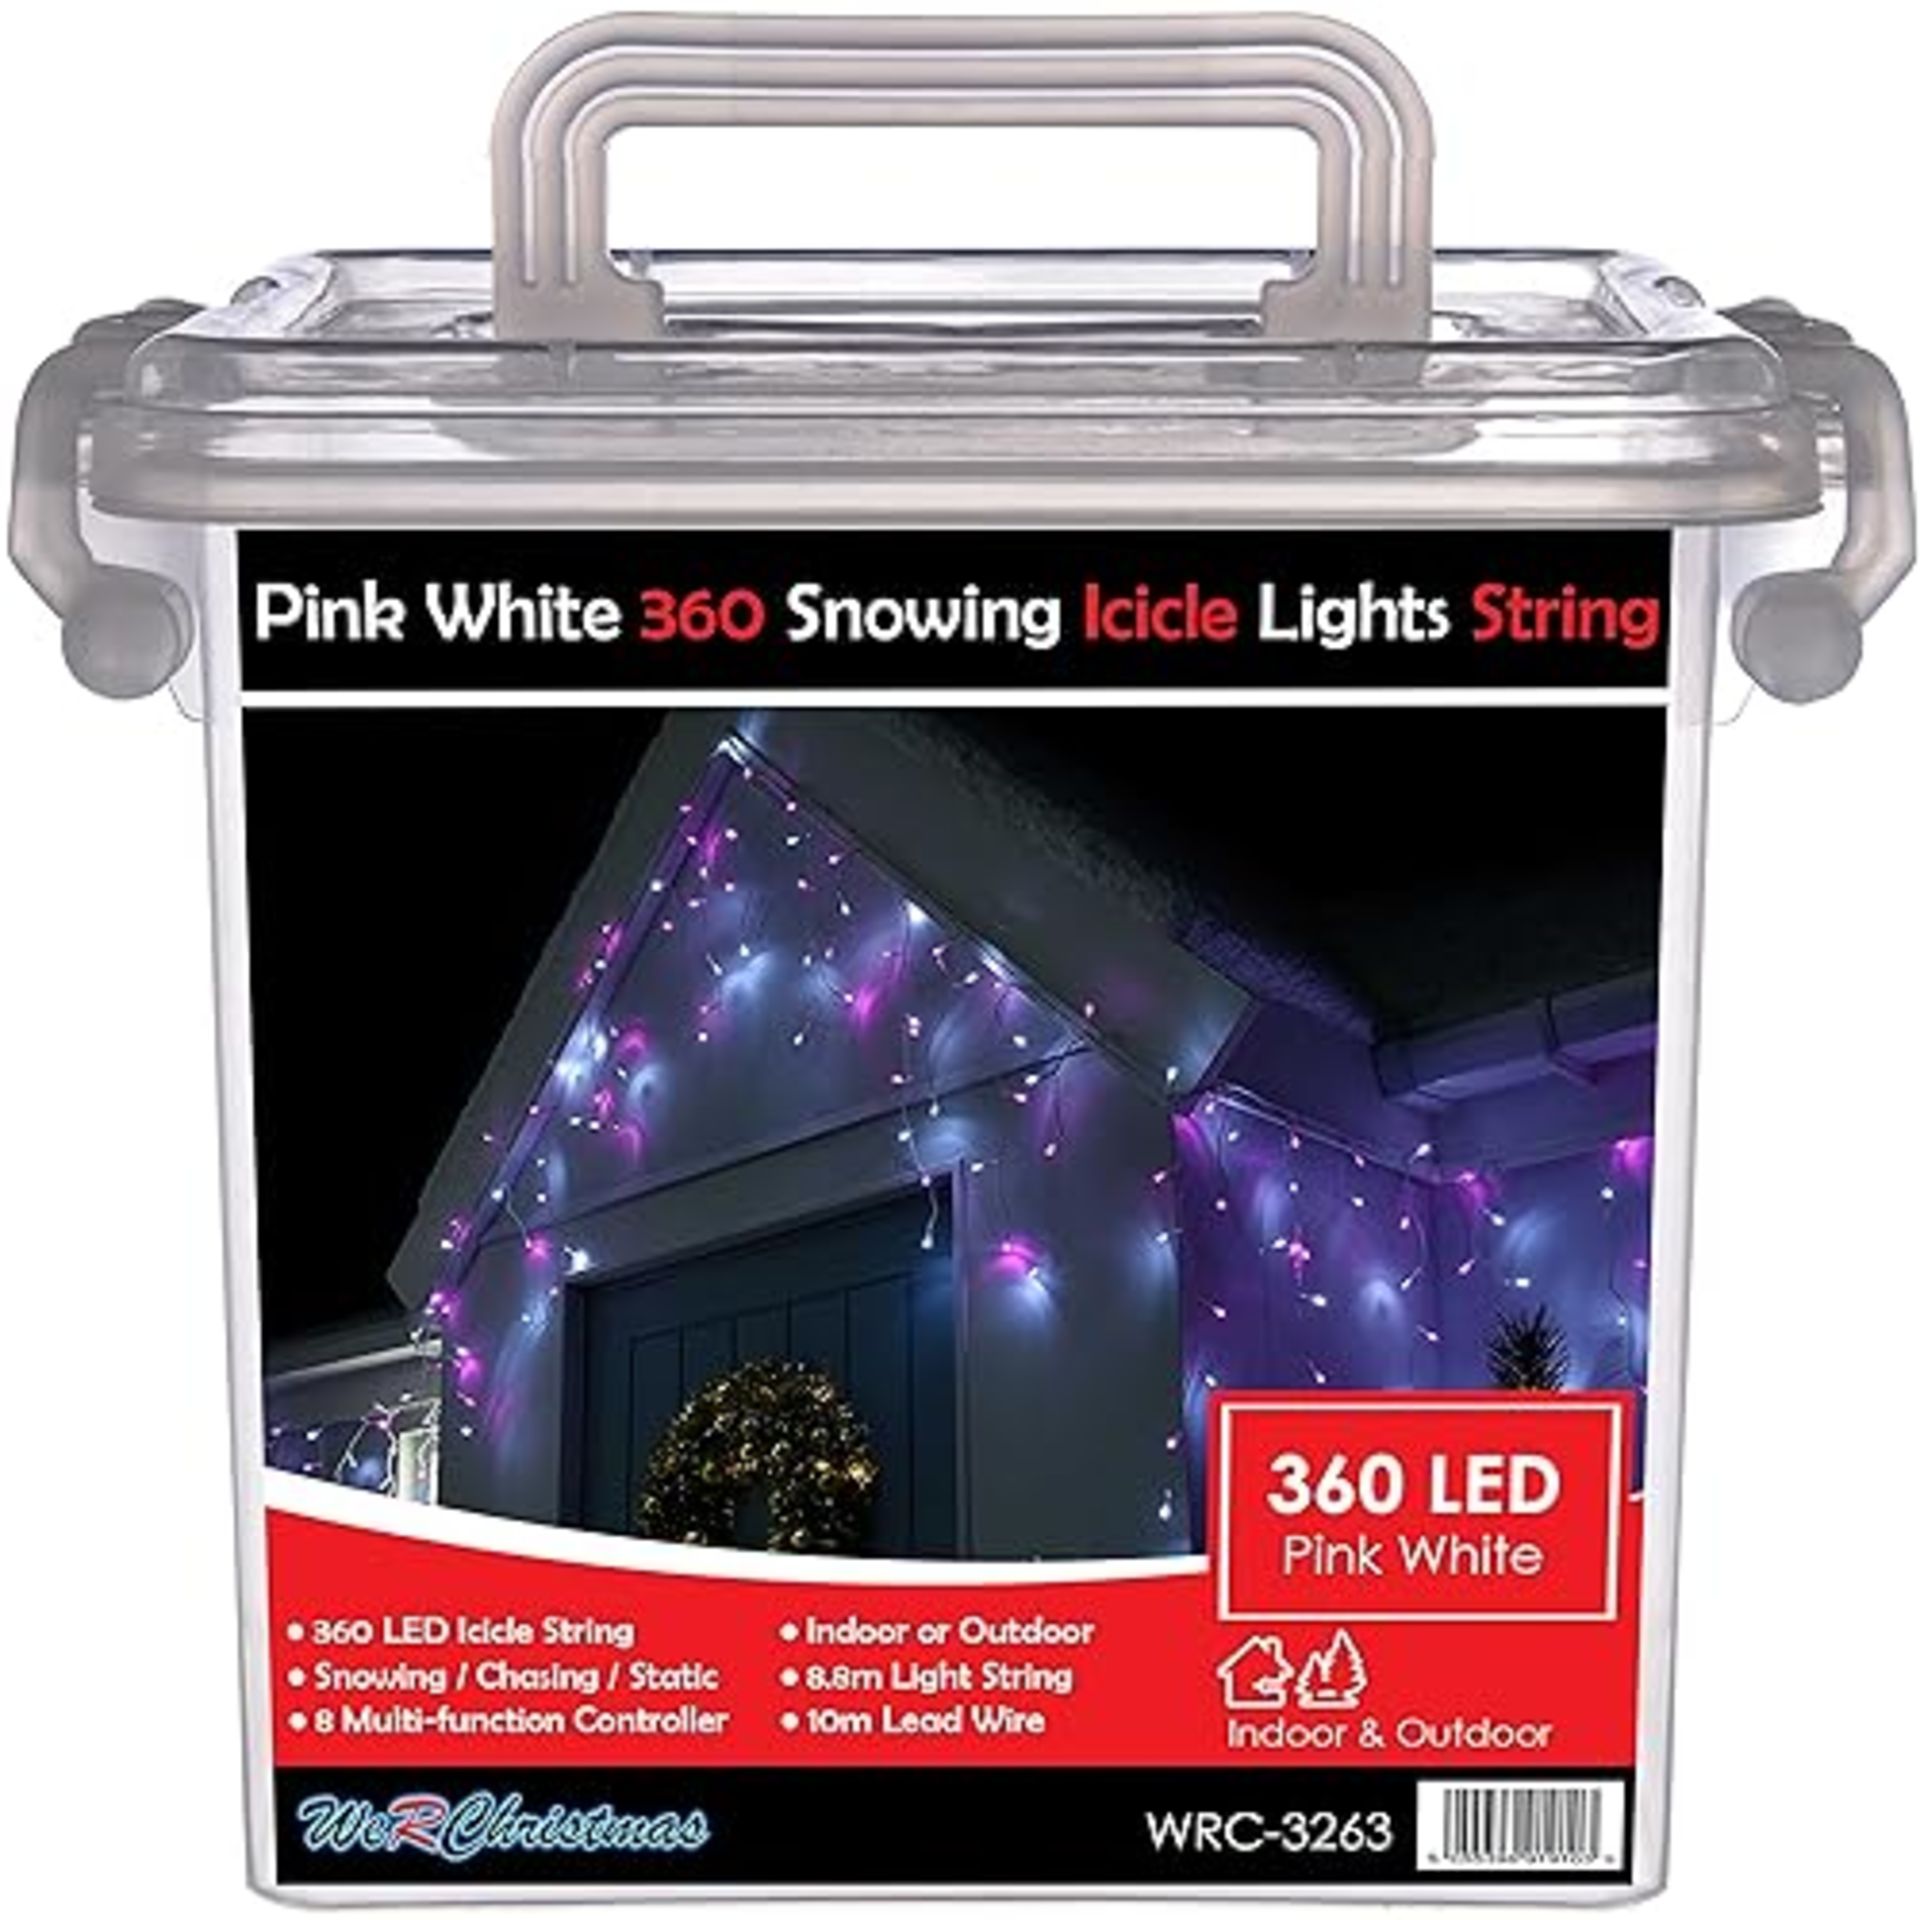 WeRChristmas Snowing Icicle Christmas Lights String with 360-LED Chasing/Static Settings and 19 m C